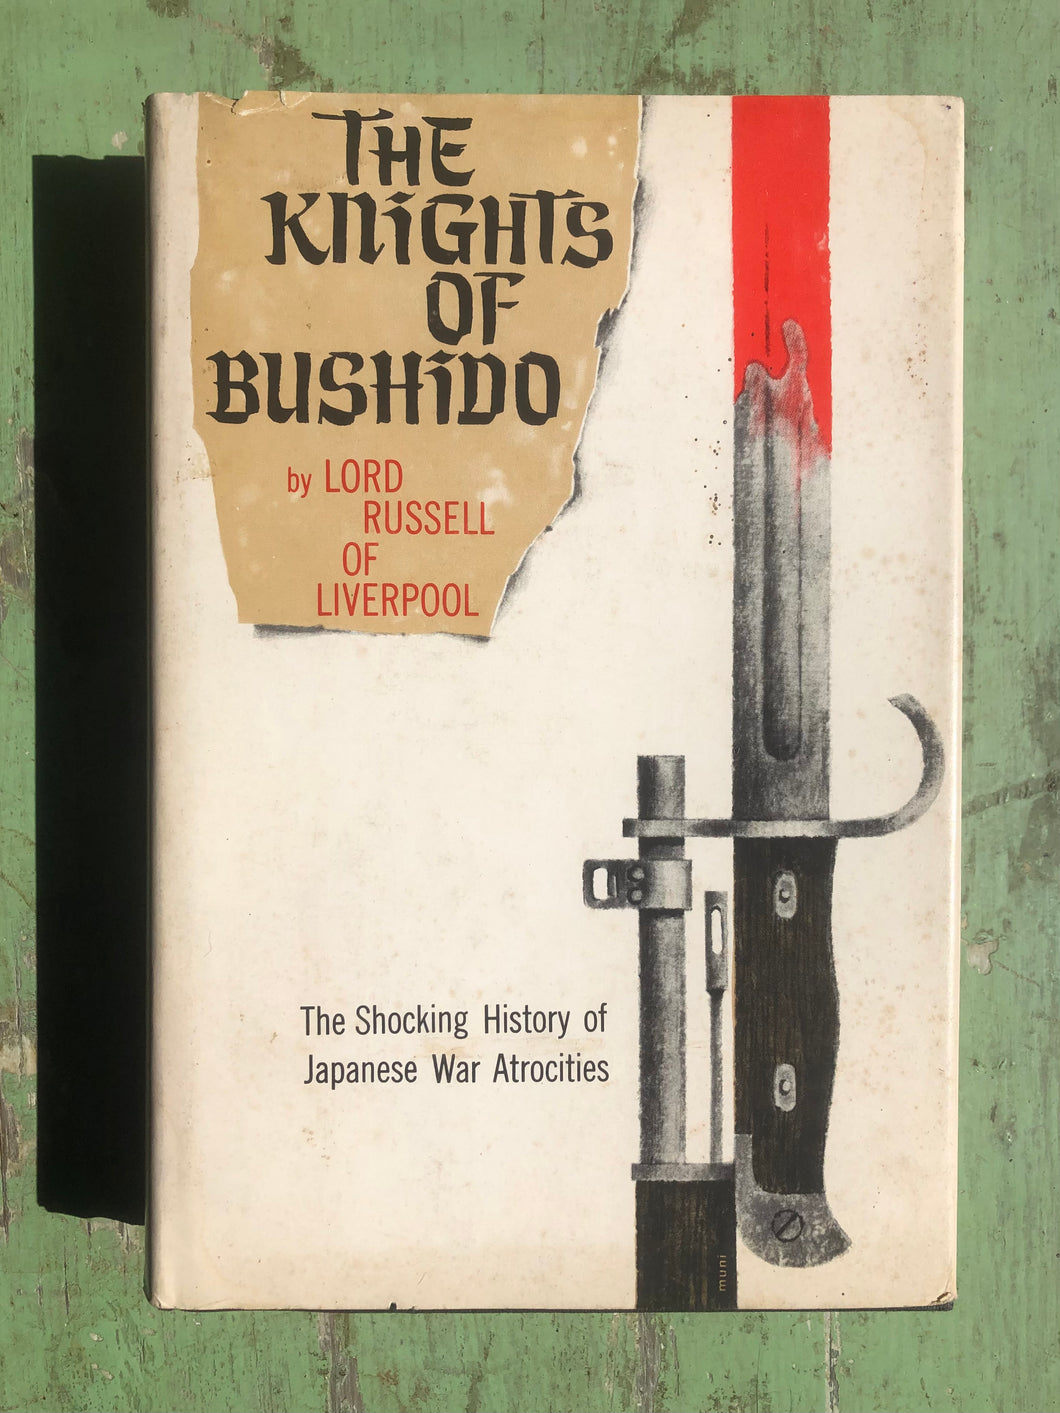 The Knights of Bushido: The Shocking History of Japanese War Atrocities by Lord Russell